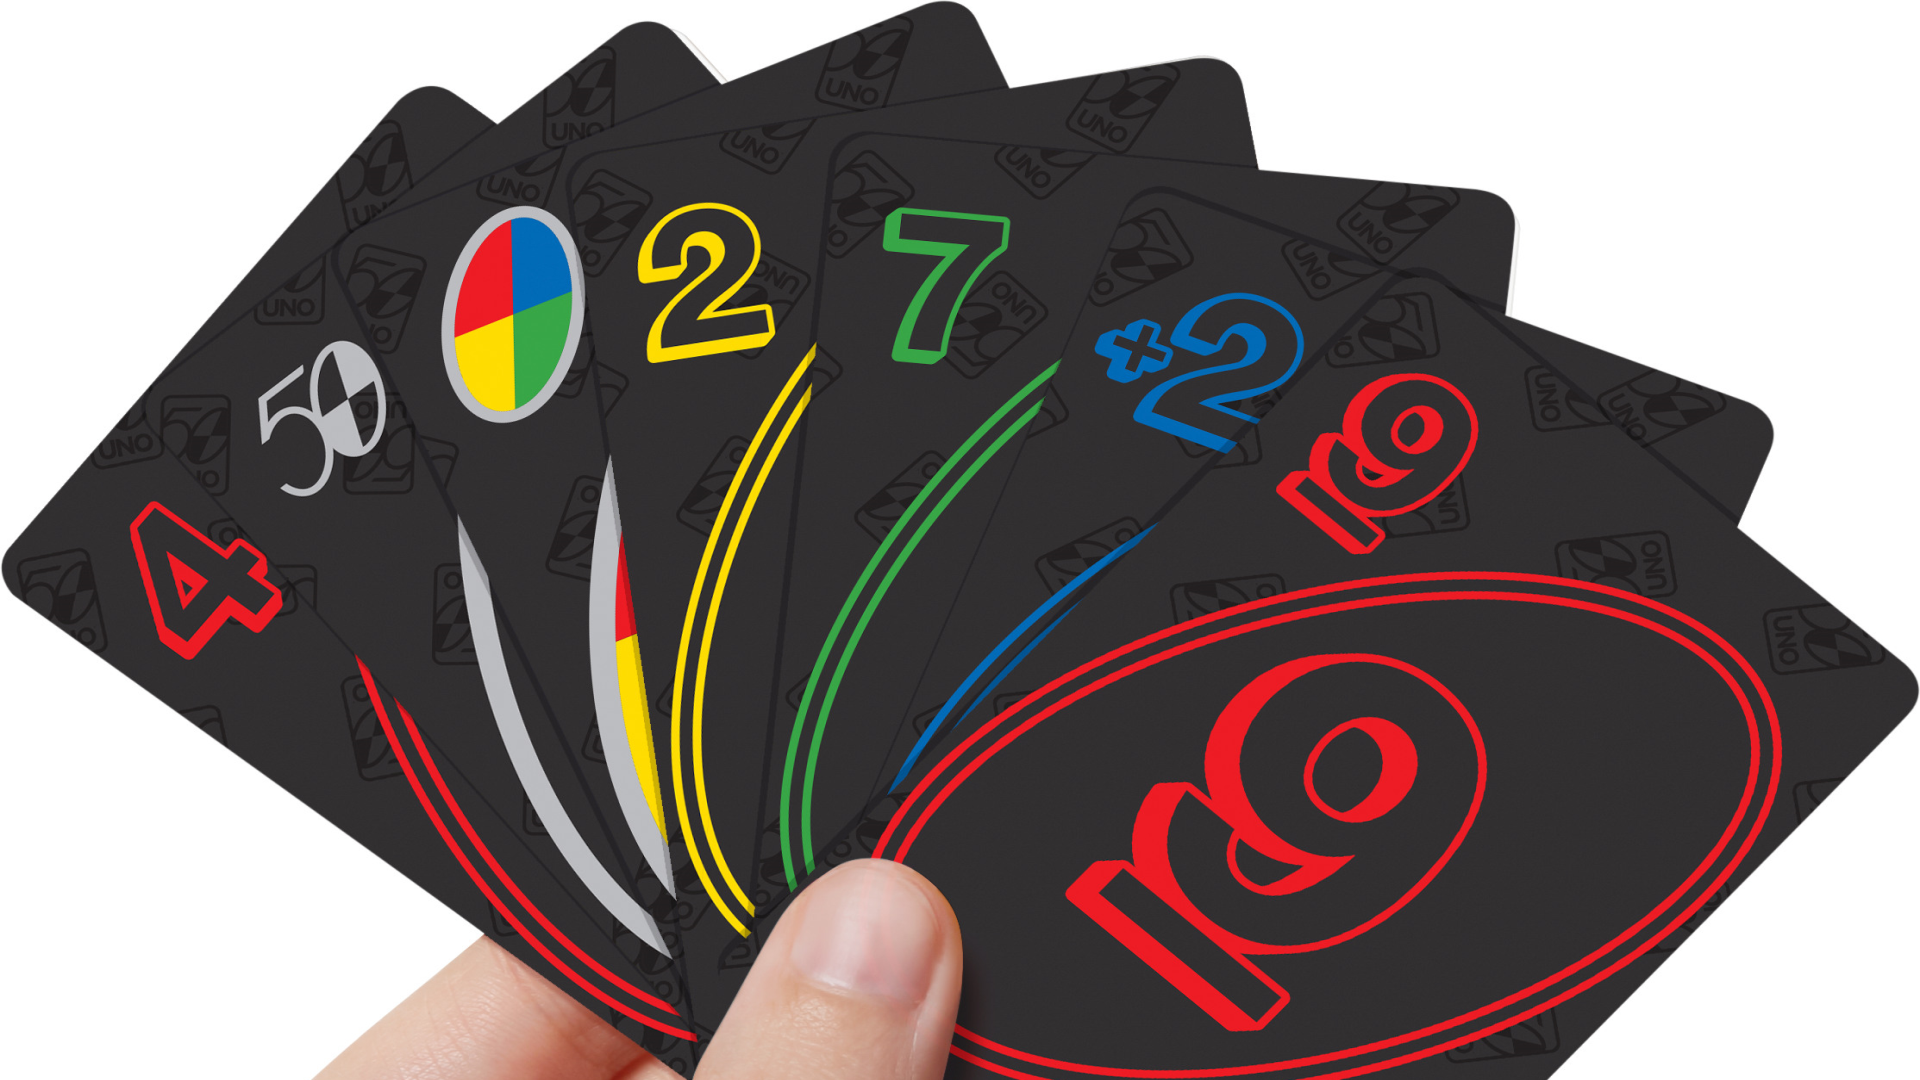 Image for Uno celebrates its 50th anniversary with new decks and $50,000 world championship